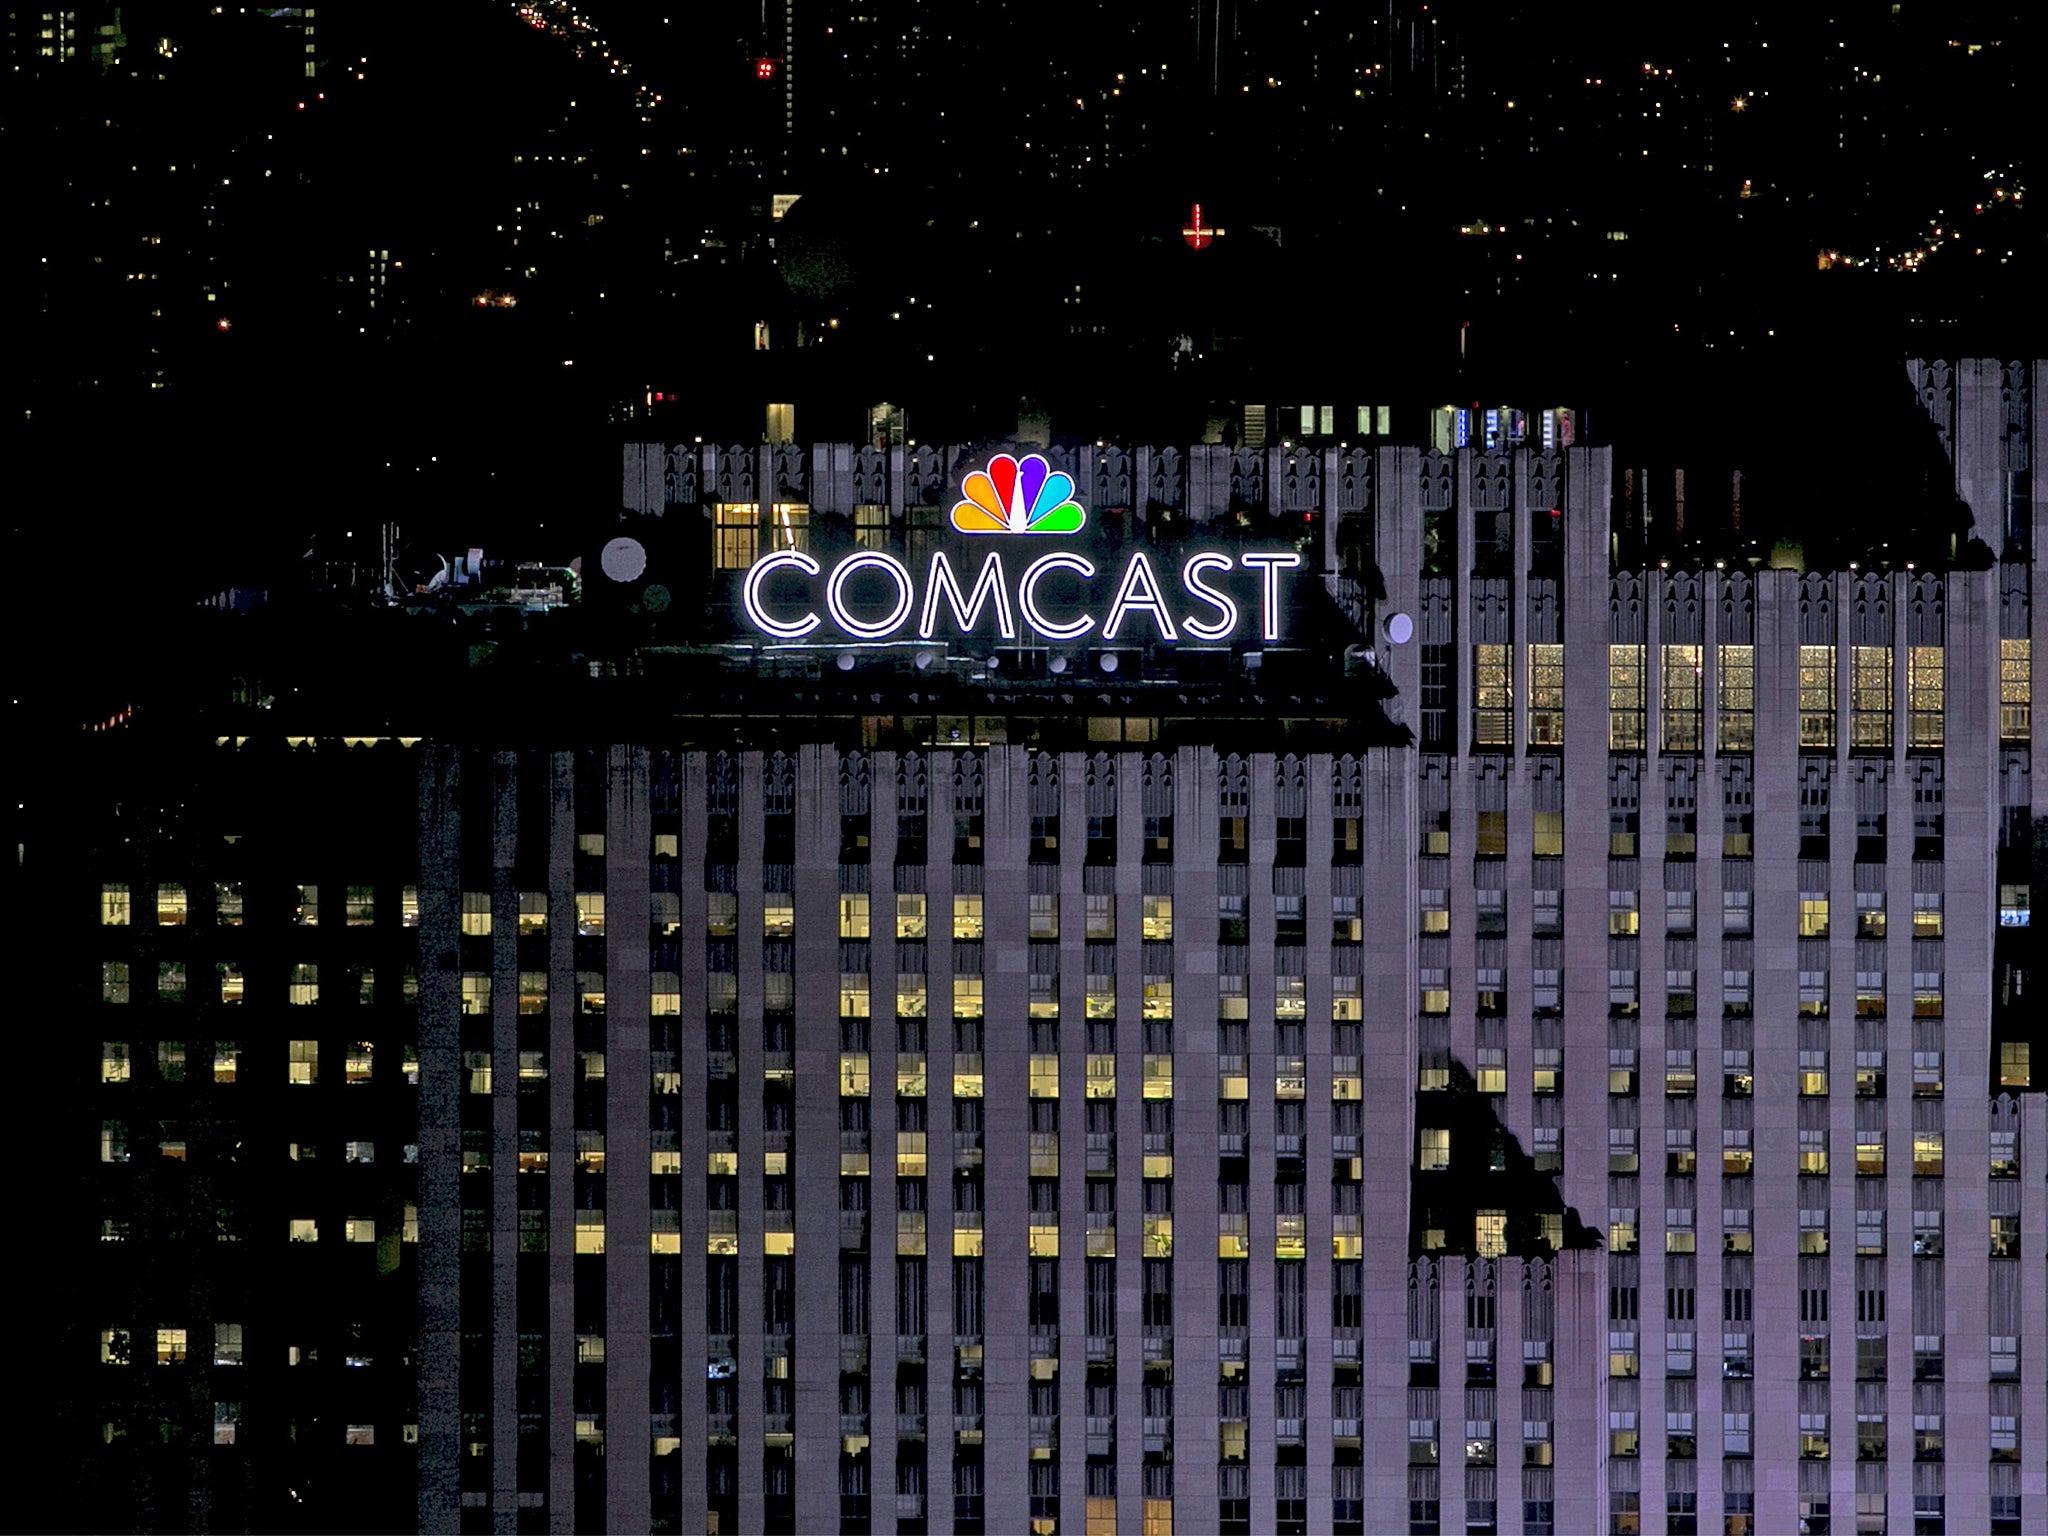 Comcast tried and failed to snap up Fox’s assets last year